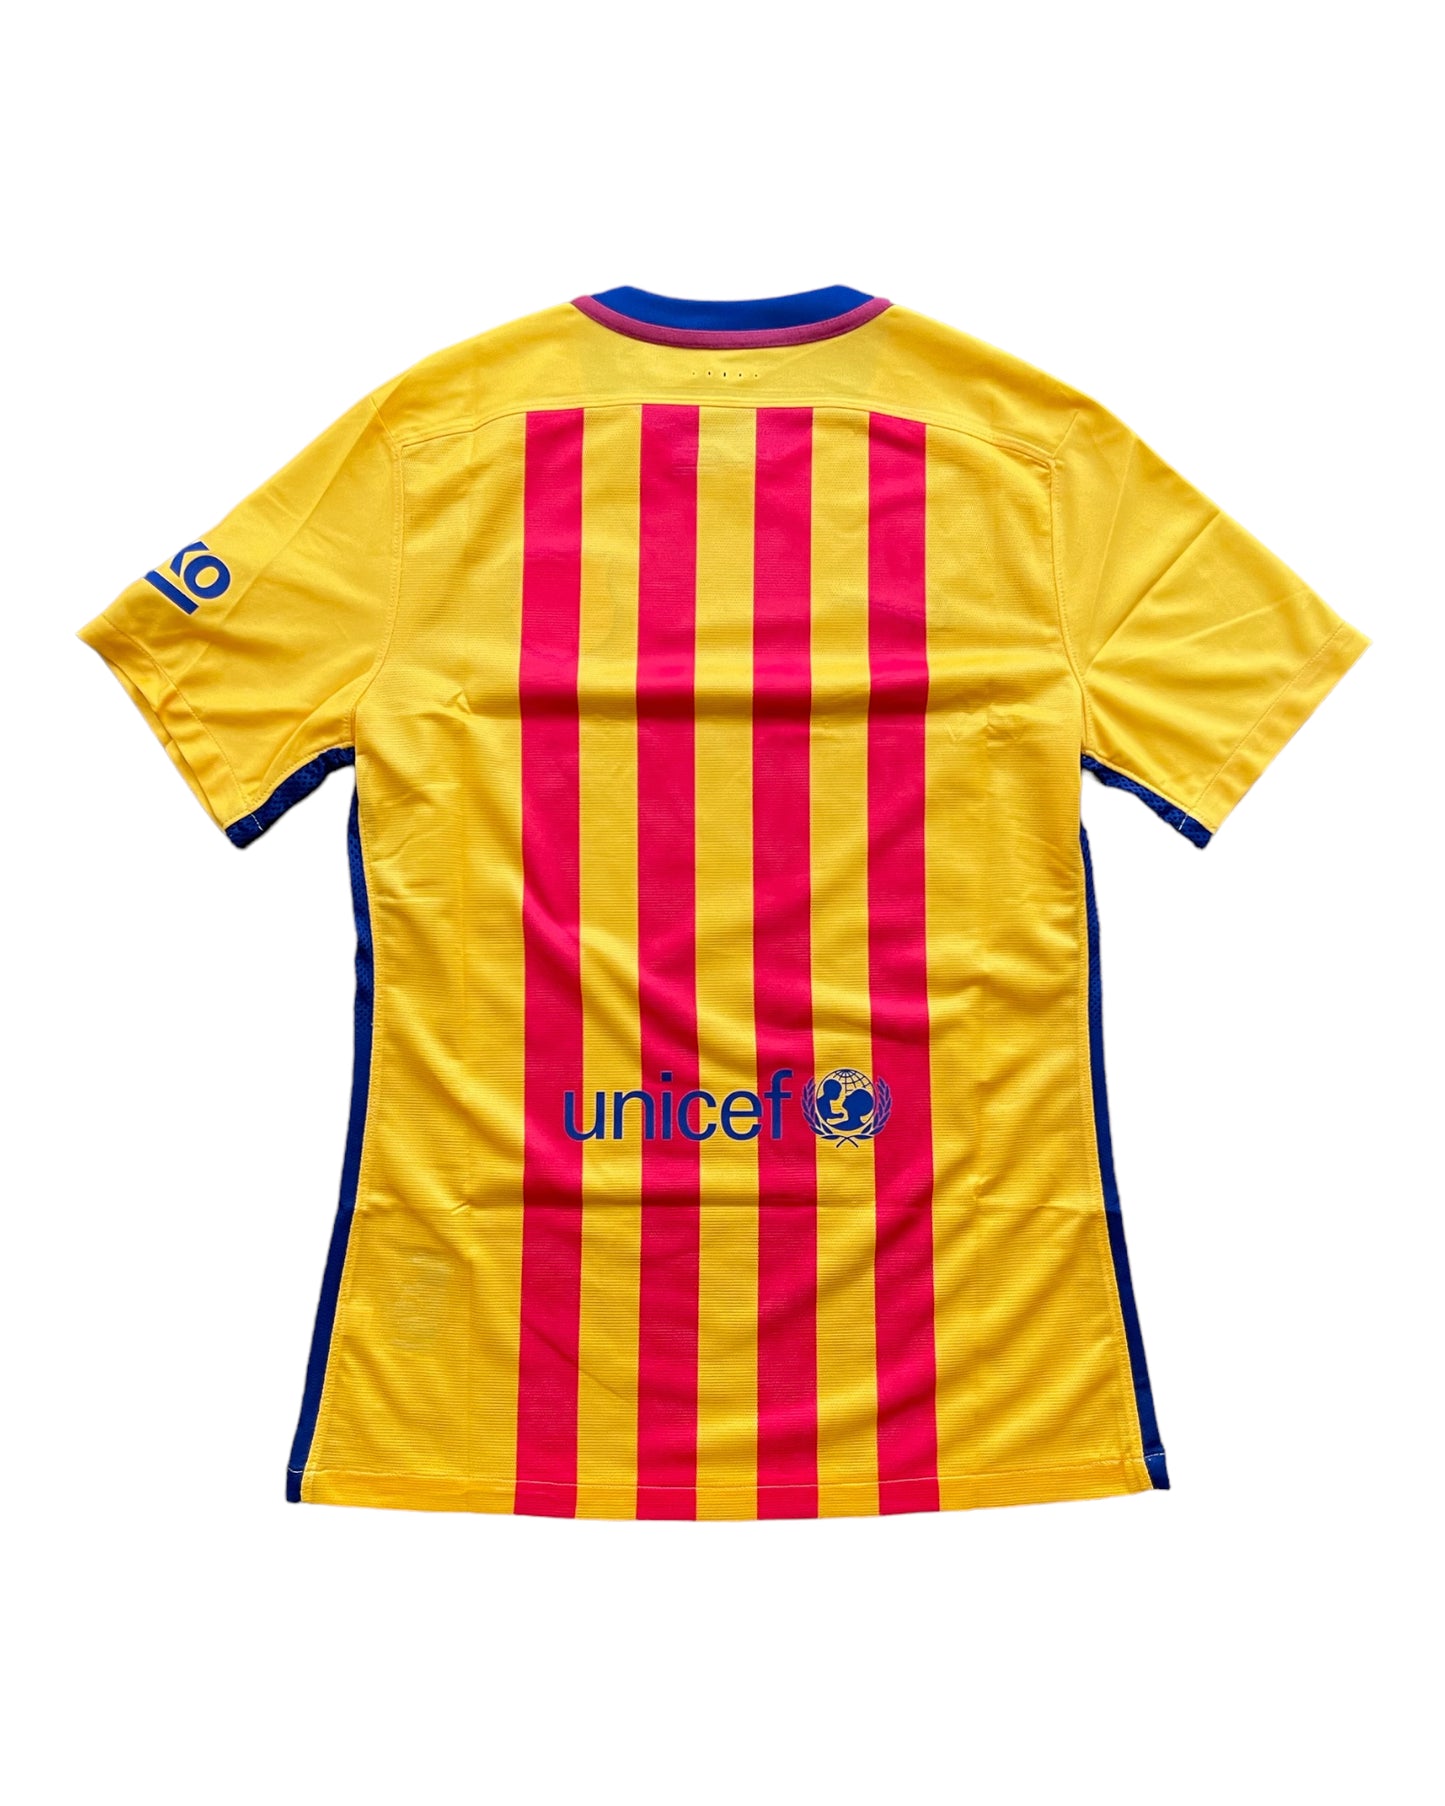 Authentic New FC Barcelona Nike DRI FIT Player's Edition / Issue 2015 - 2016 Away Football Shirt Qatar Airways Unicef Beko BNWT Deadstock Red Blue Size M Golden Yellow